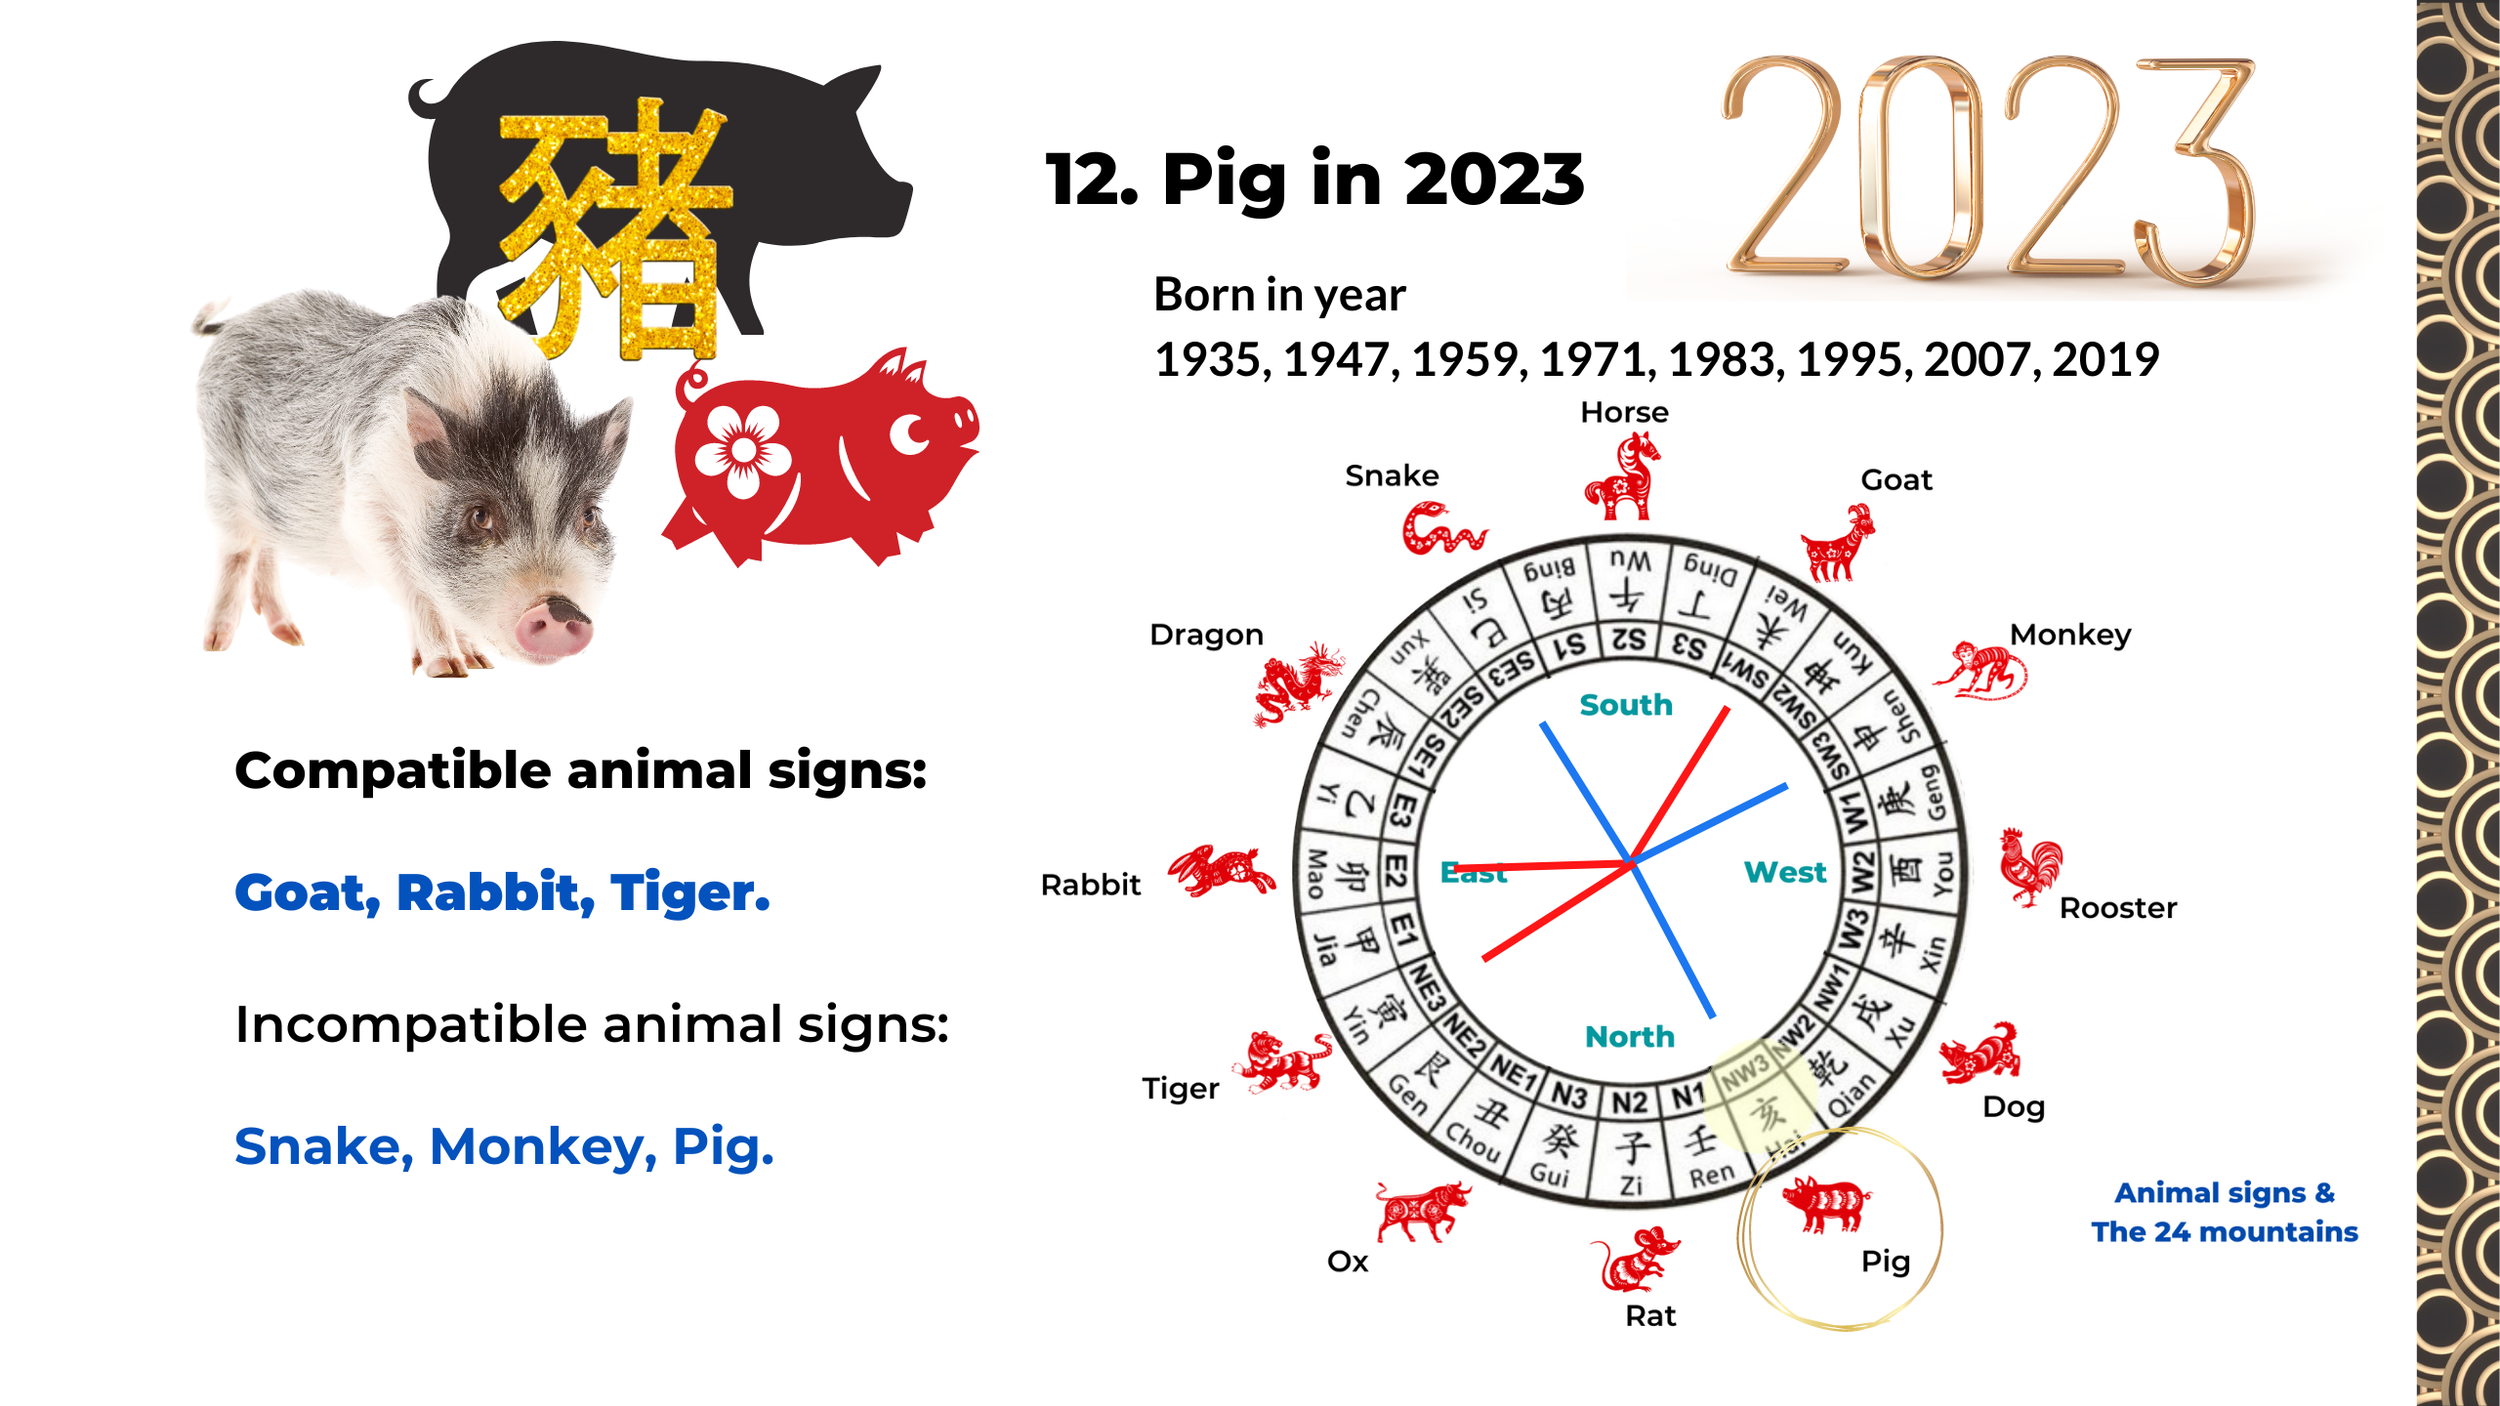 2023 Zodiac Analysis for Rooster, Dog, and Pig Part 4 of 4 — Picture